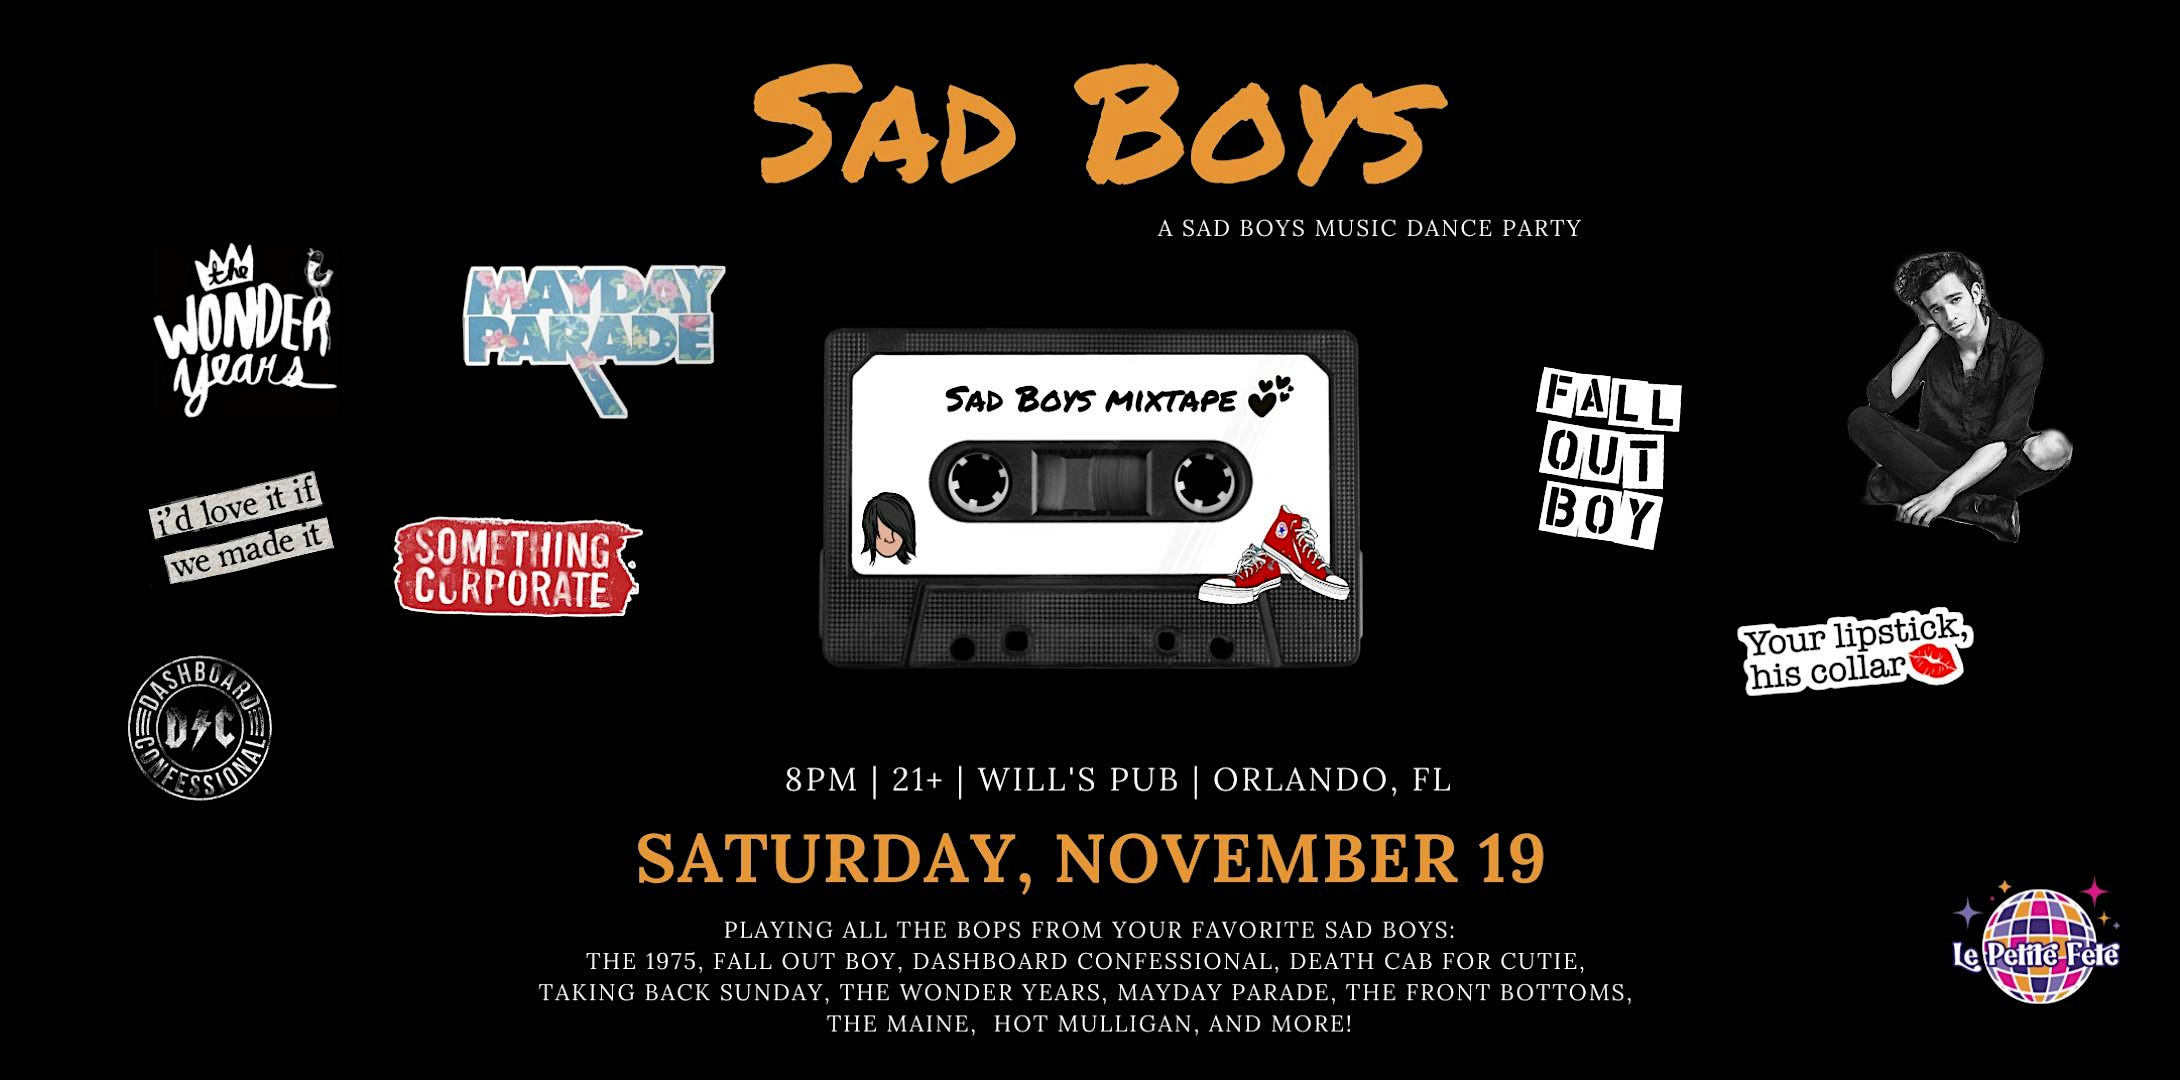 A Sad Boys Music Dance Party in Orlando at Will's Pub